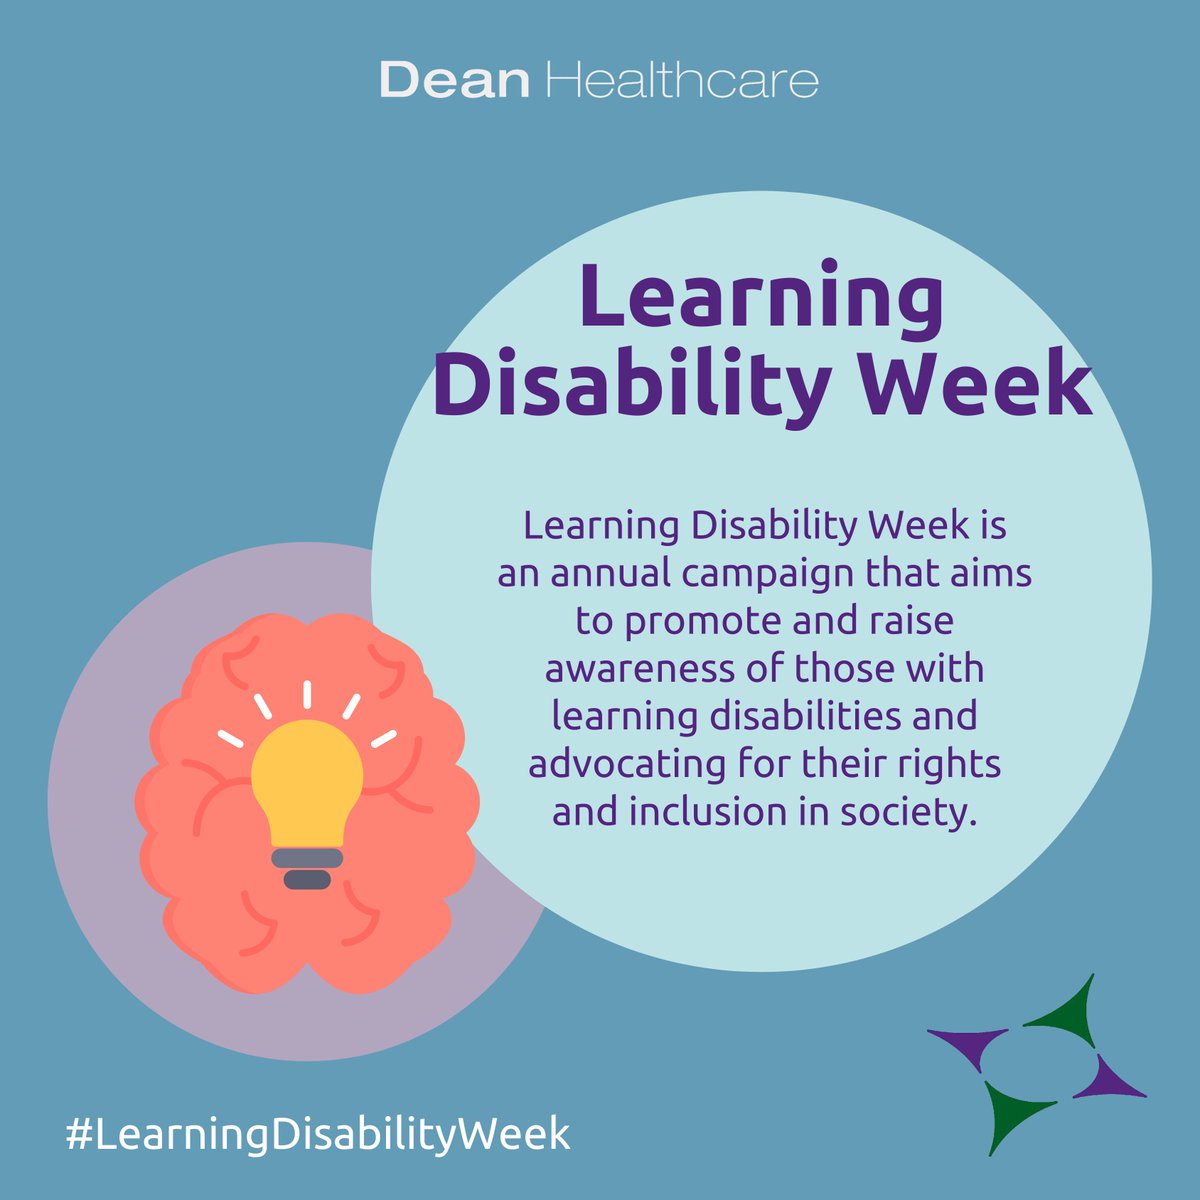 It's #LearningDisabilityWeek, an annual campaign that aims to promote and raise awareness of those with learning disabilities. All this week we'll be sharing important and insightful information about those living with #learningdisabilities.

#disability #awareness #support